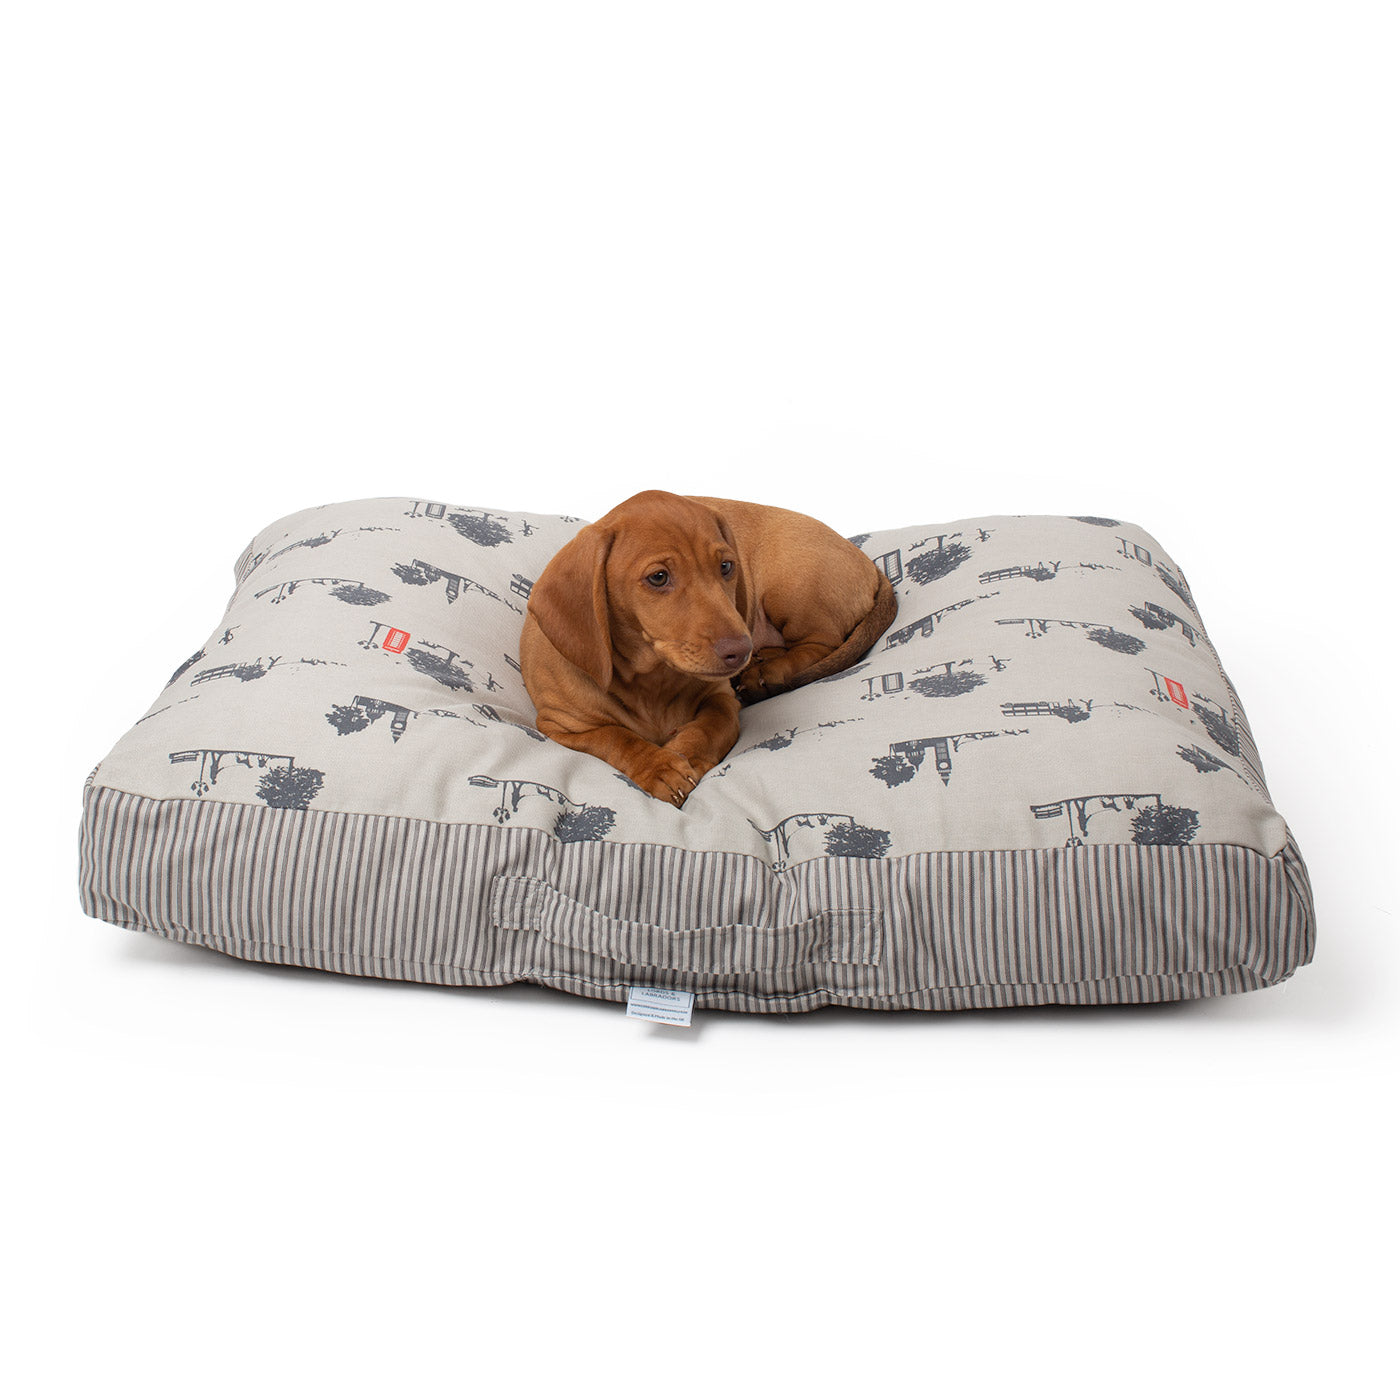 Luxury Sleepeeze Dog Cushion in Striped Hyde Park, The Perfect Pet Bed Time Accessory! Available Now at Lords & Labradors US